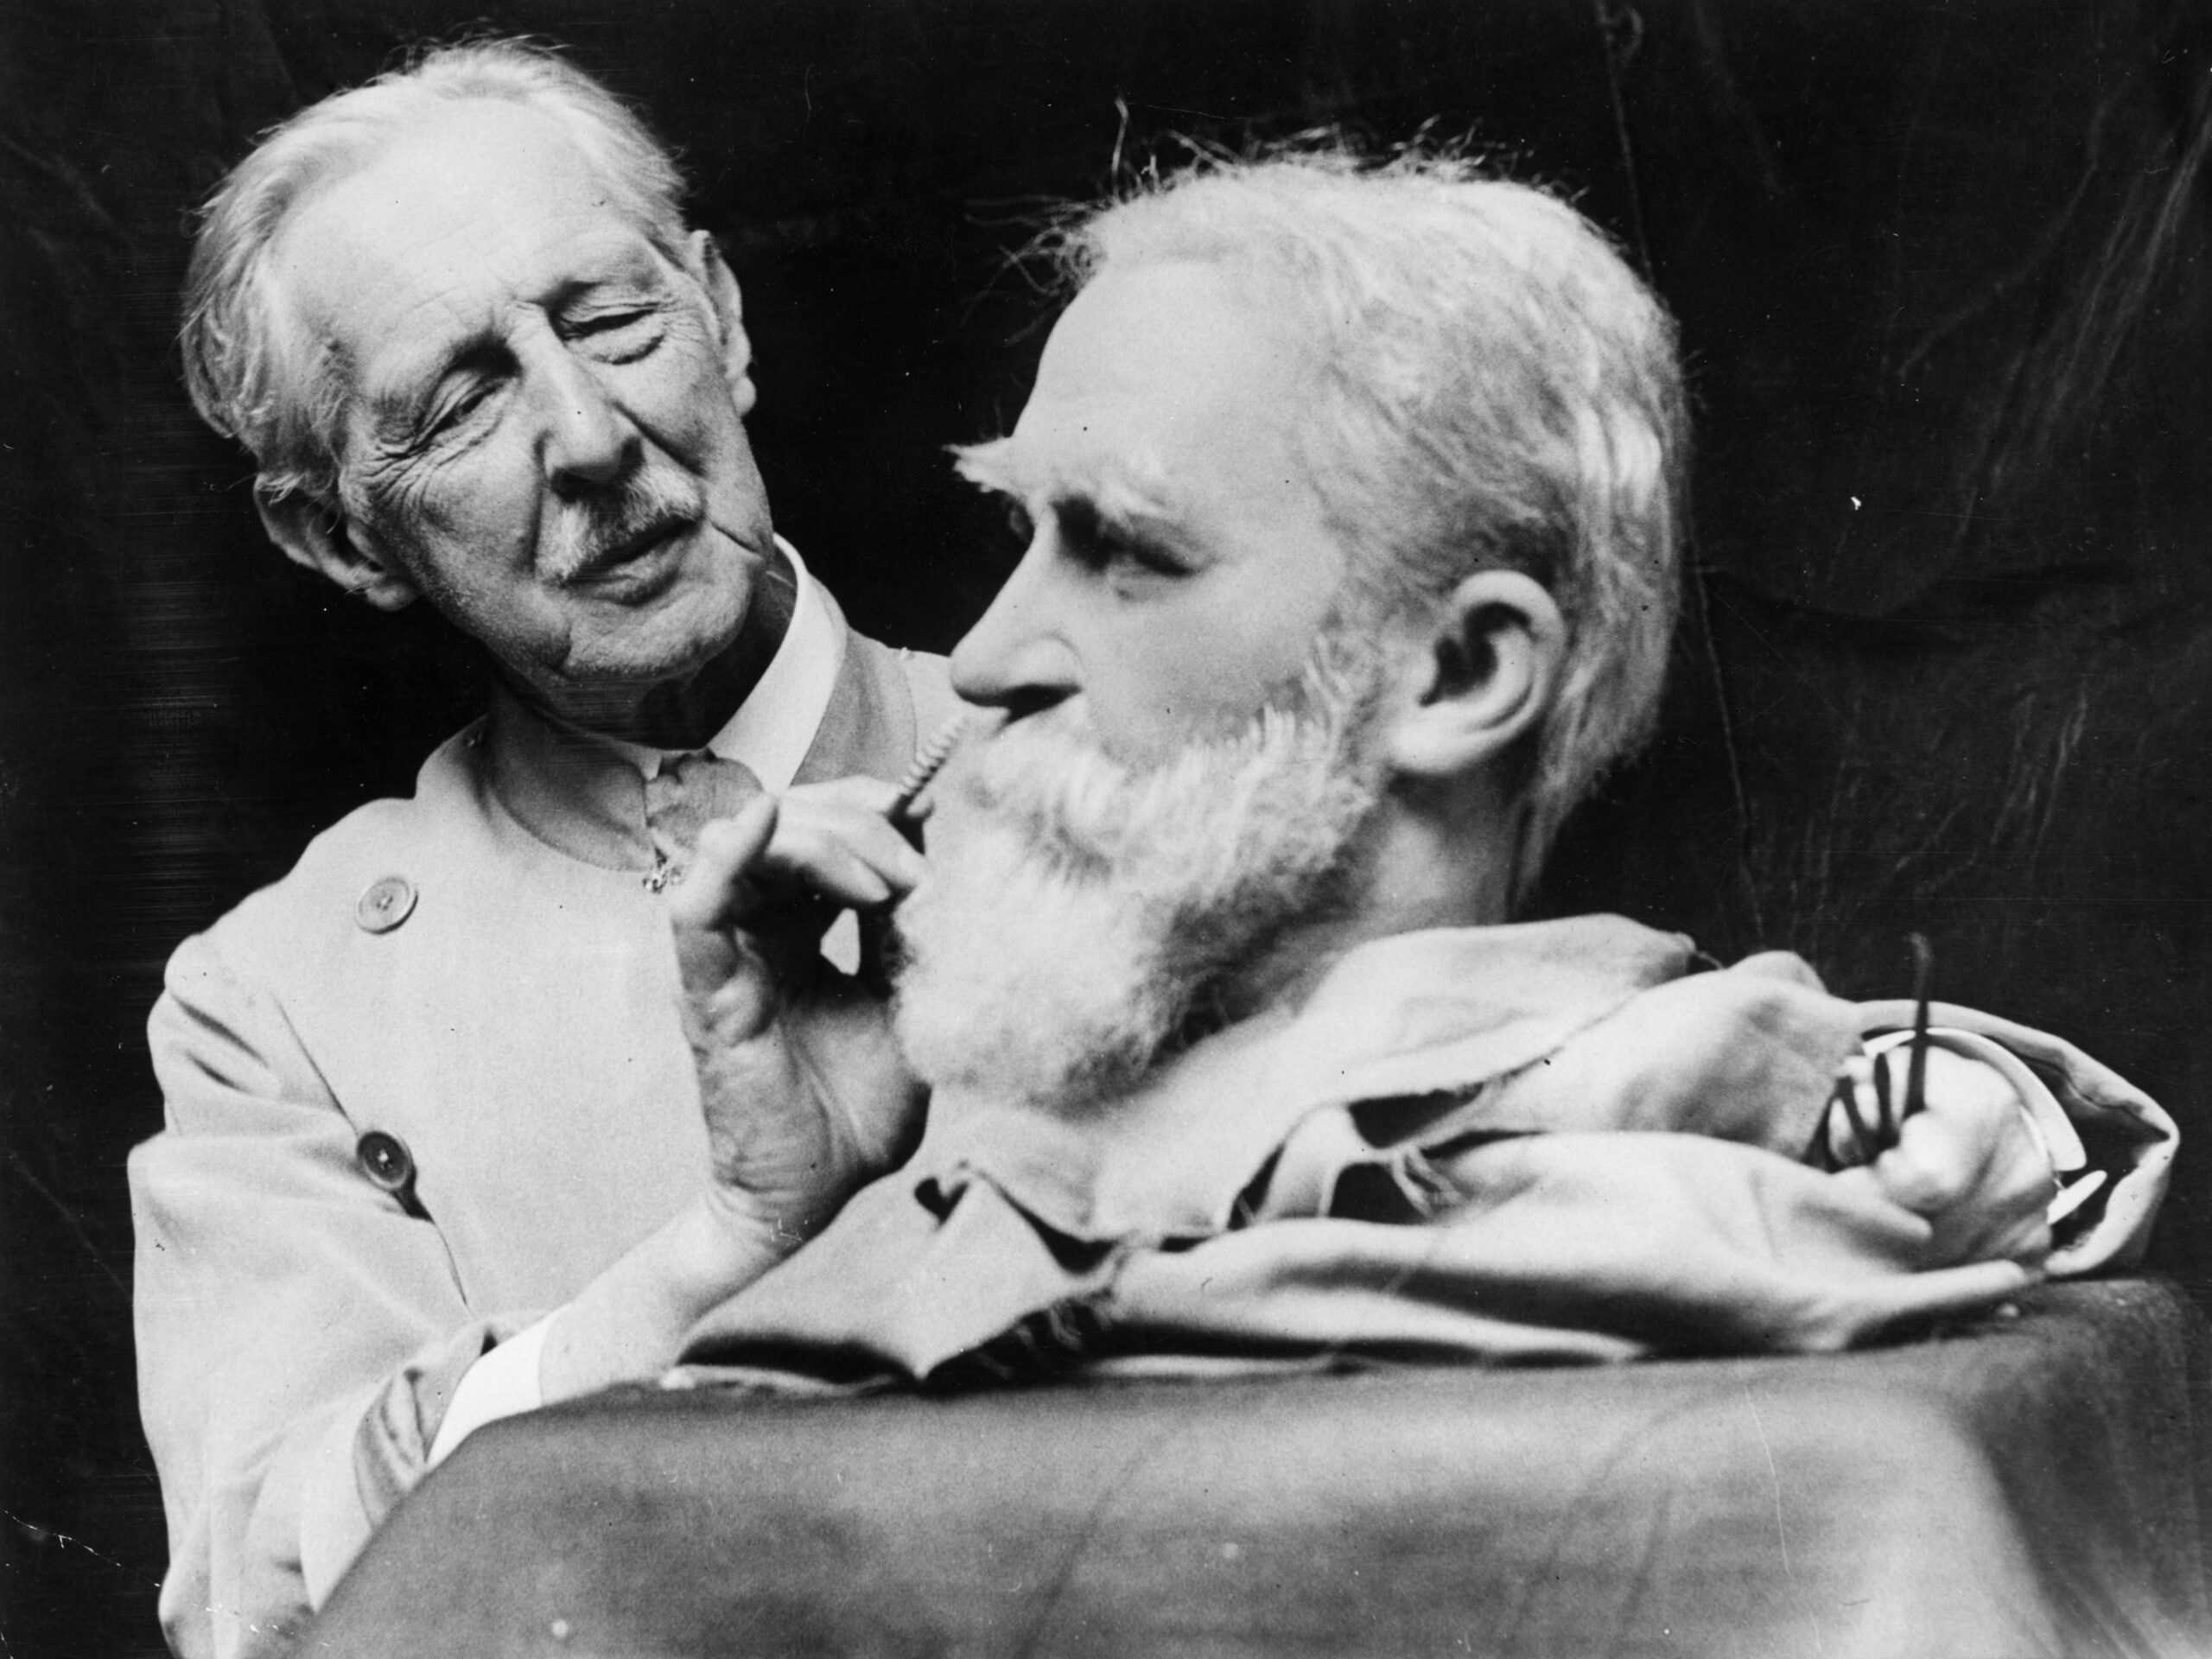 circa 1930: John Tussaud, the great grandson of Madame Tussaud working on a model of the Irish playwright and social critic, George Bernard Shaw (1856 - 1950).